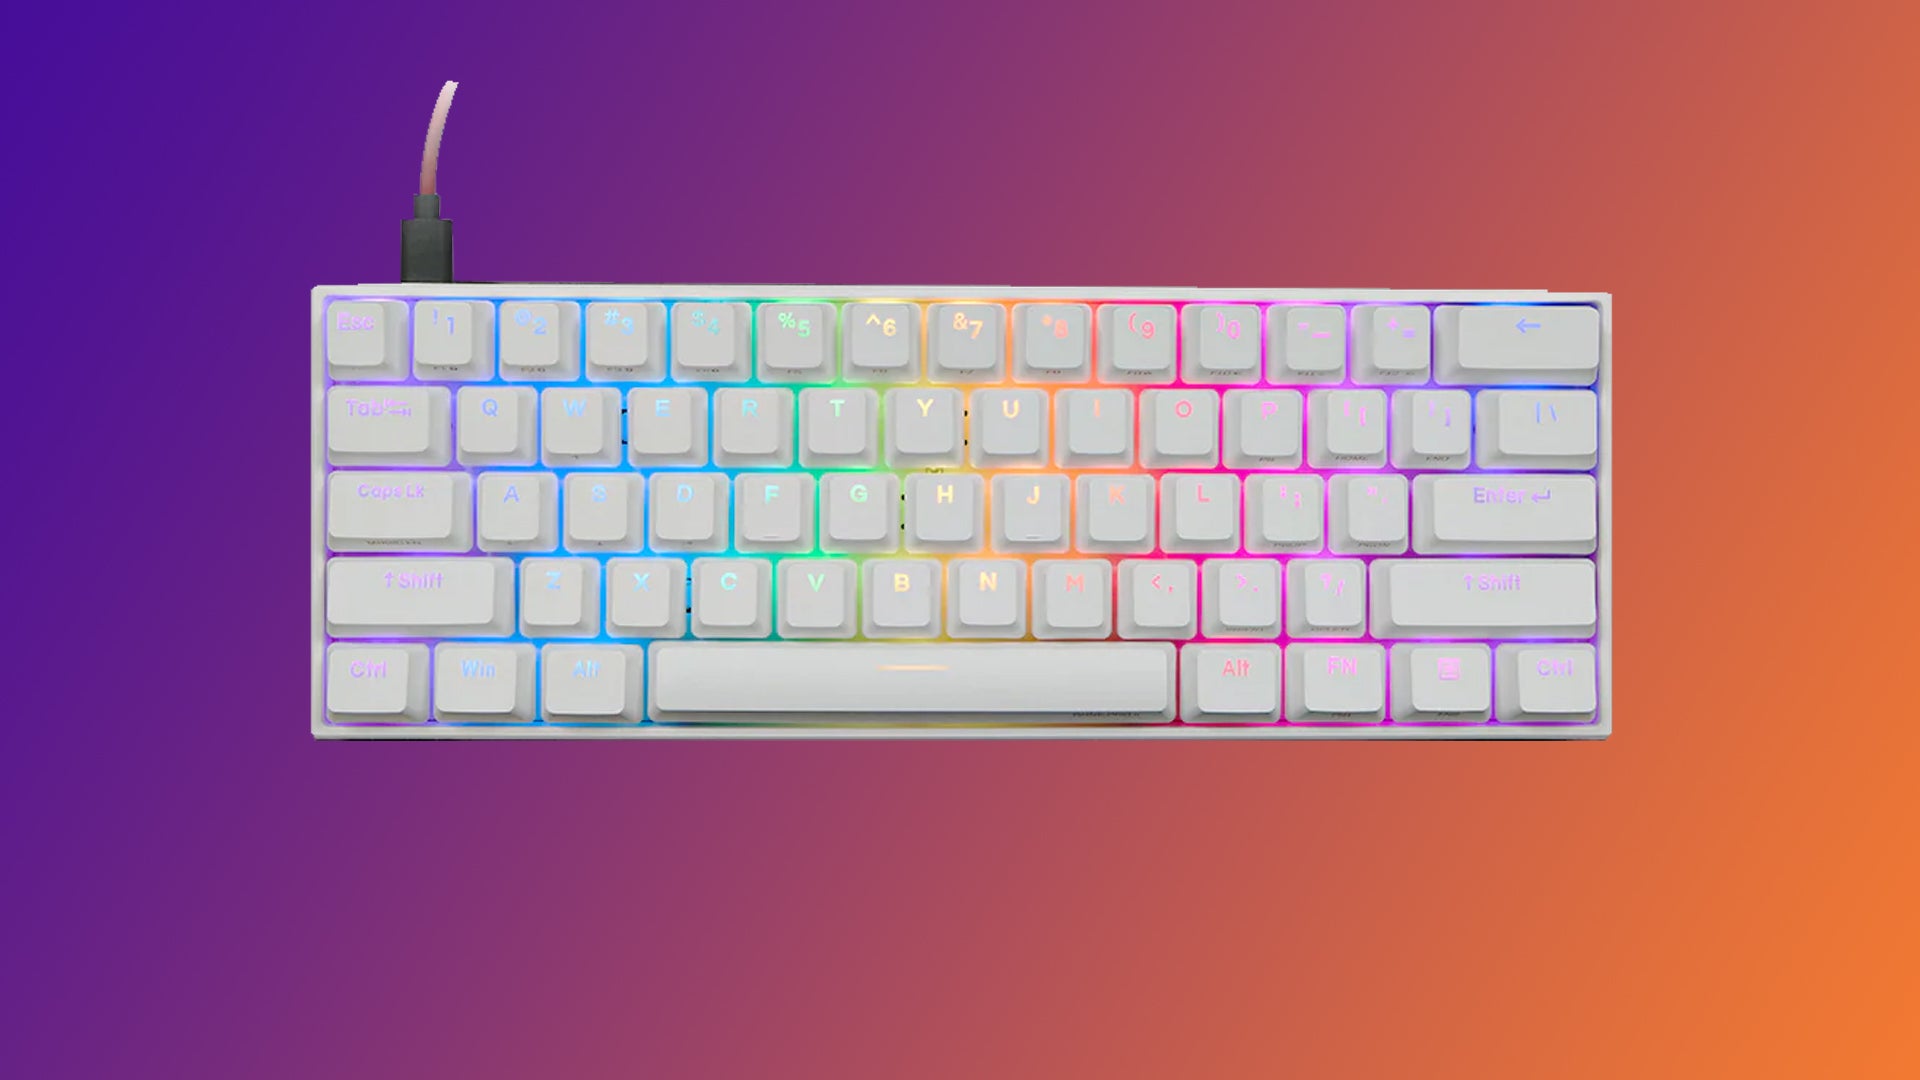 Image of an Anne Pro2 keyboard on a purple to orange gradient background